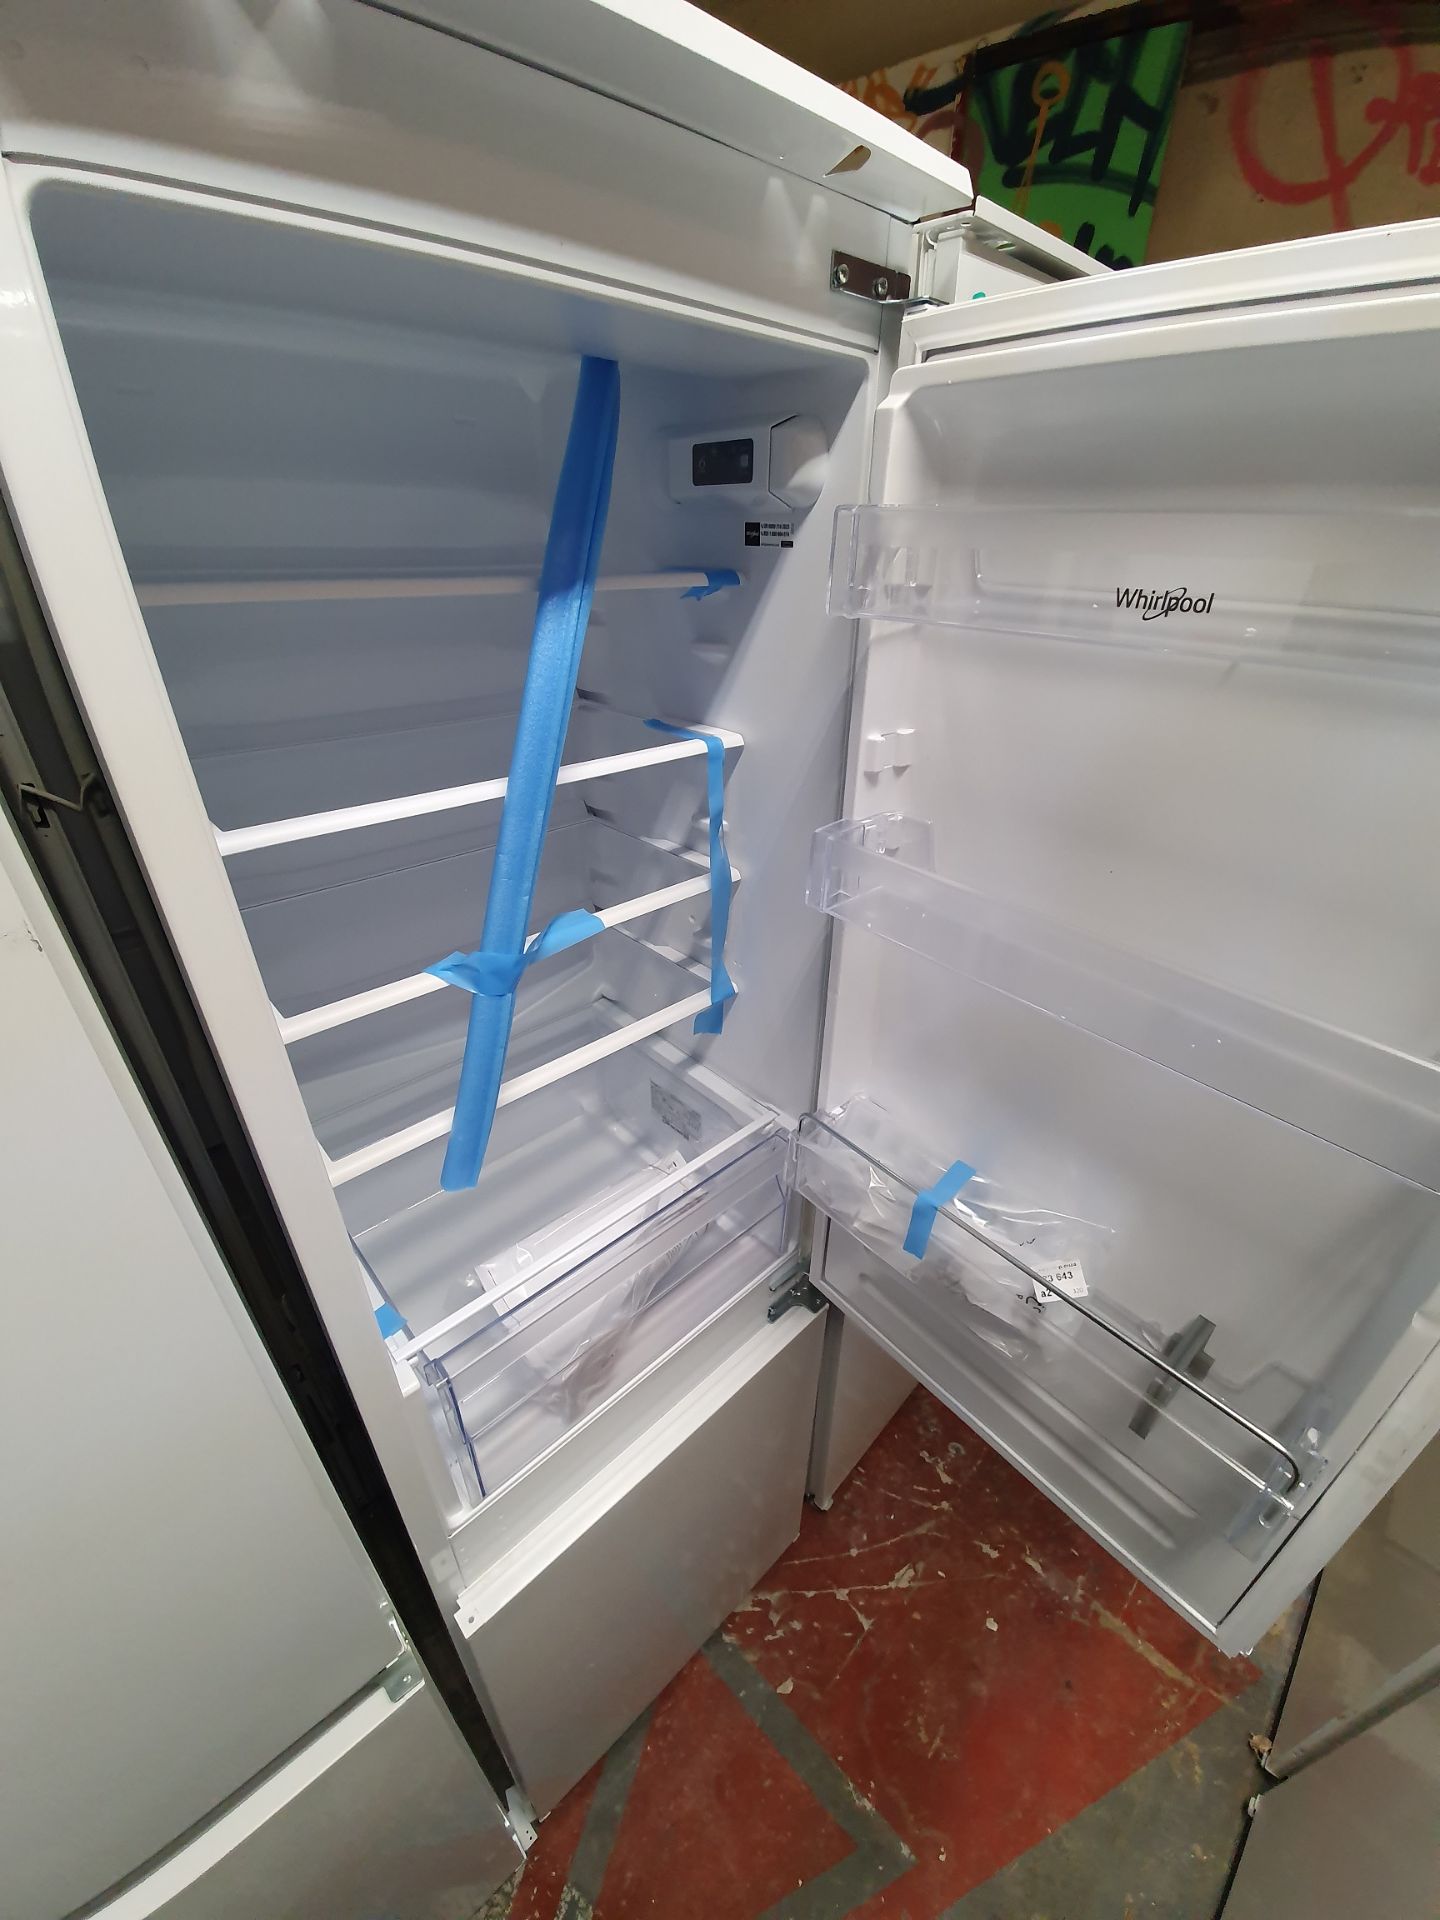 NEW/GRADED AND UNPACKAGED Whirlpool, ART6550/A+SF.1, Integrated Fridge Freezer (Brand new slight - Image 10 of 14